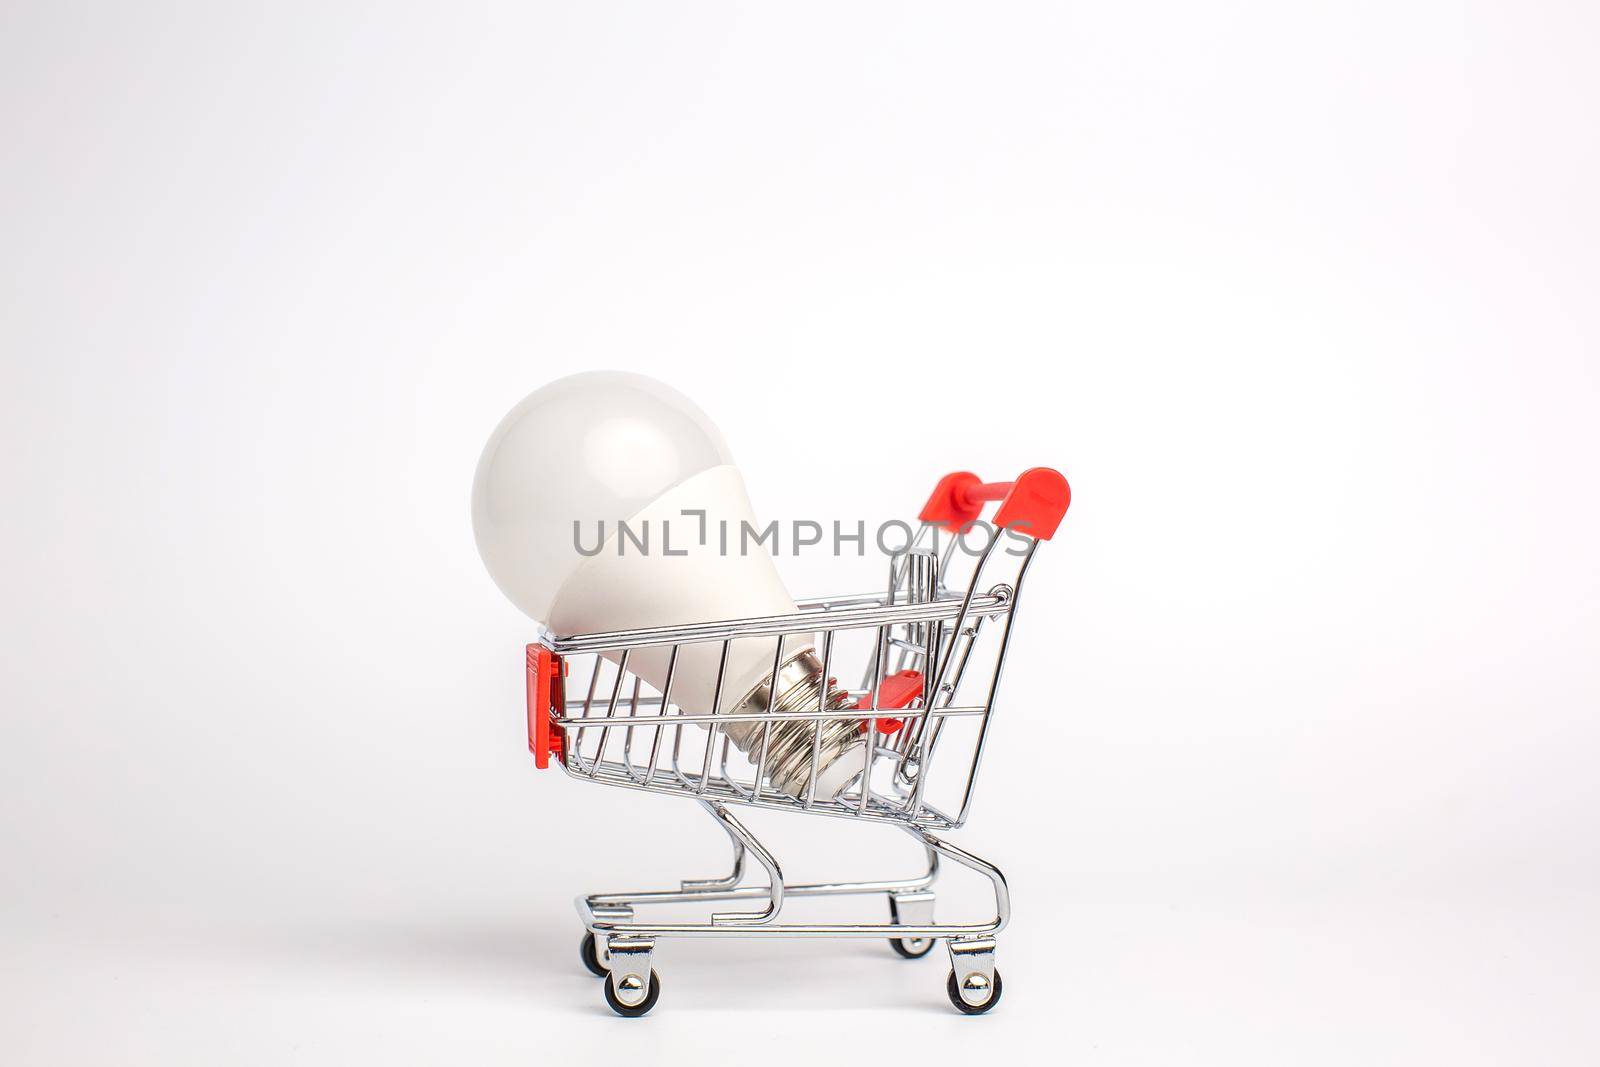 LED light bulbs on a cart, Isolated on white background. The concept of selling and buying business ideas, saving energy and cash